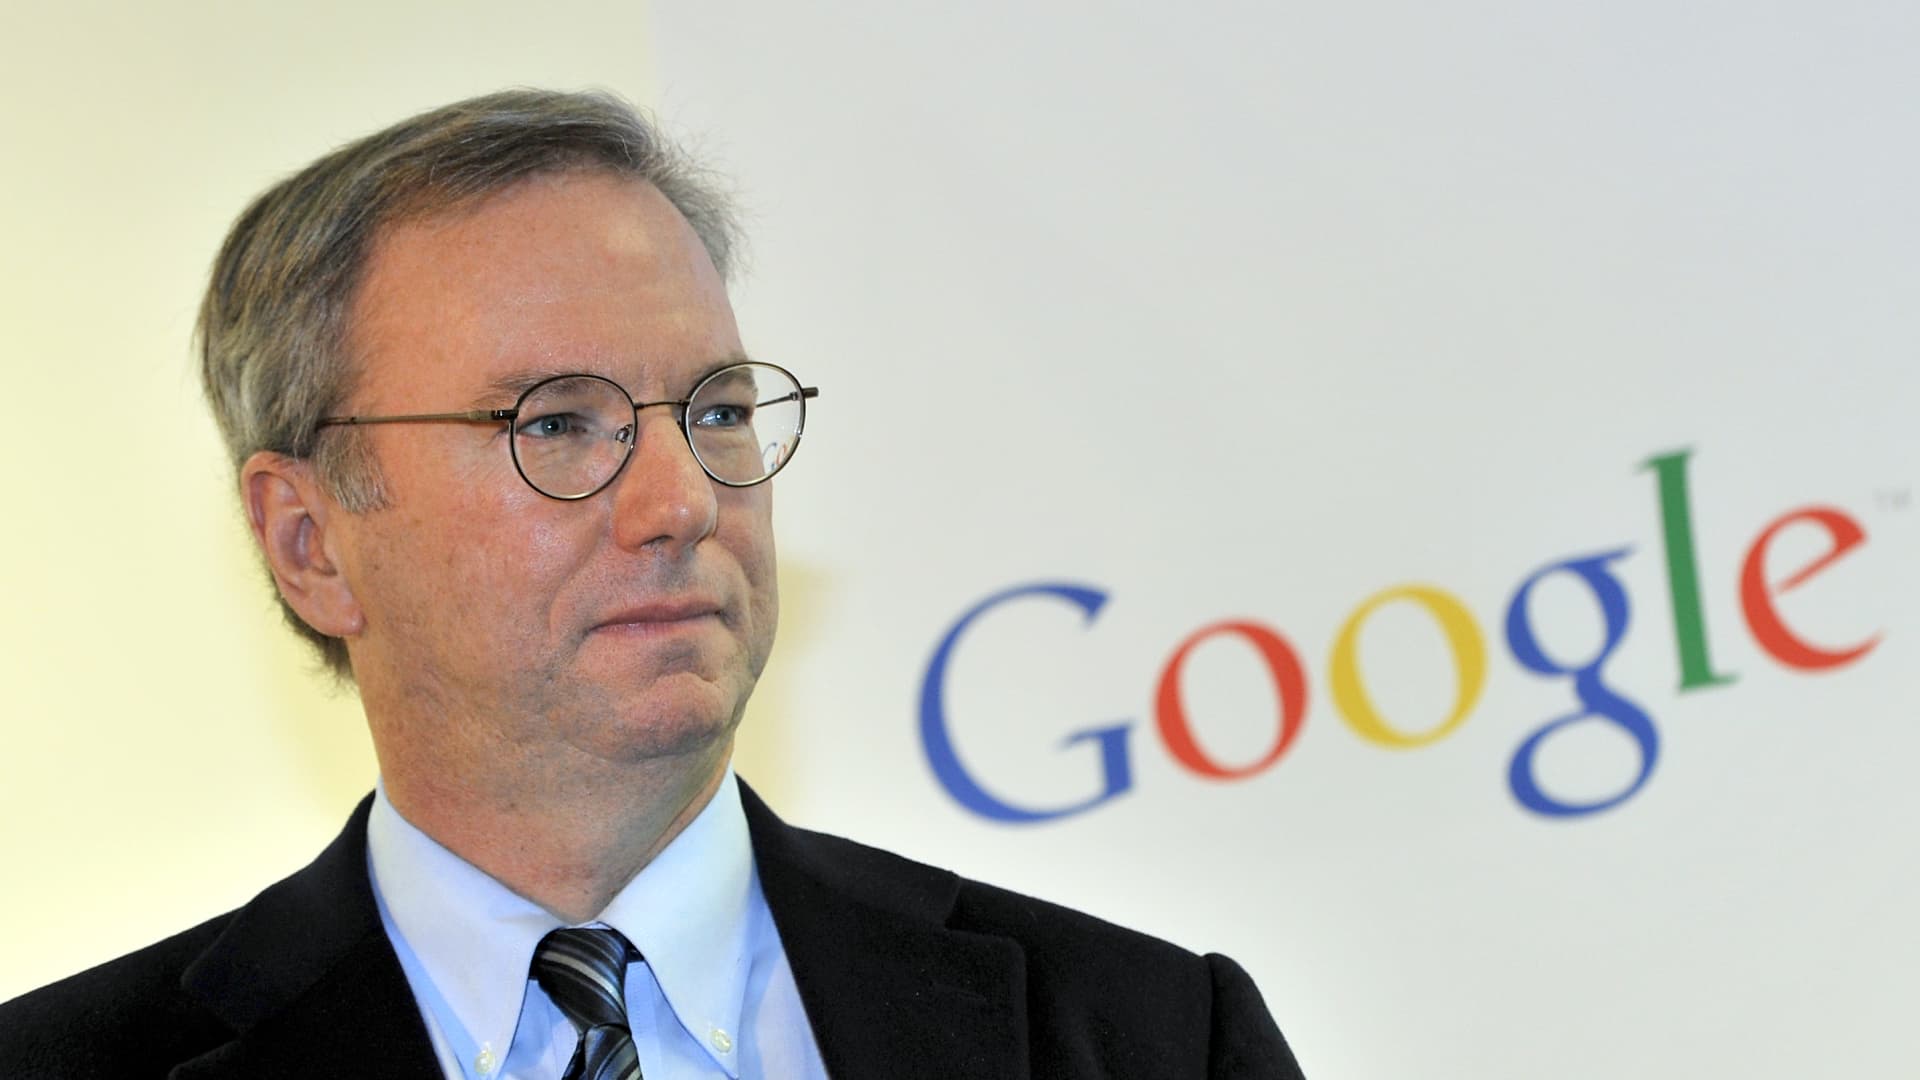 How Google's former CEO Eric Schmidt helped write AI laws in Washington without publicly disclosing investments in AI start-ups